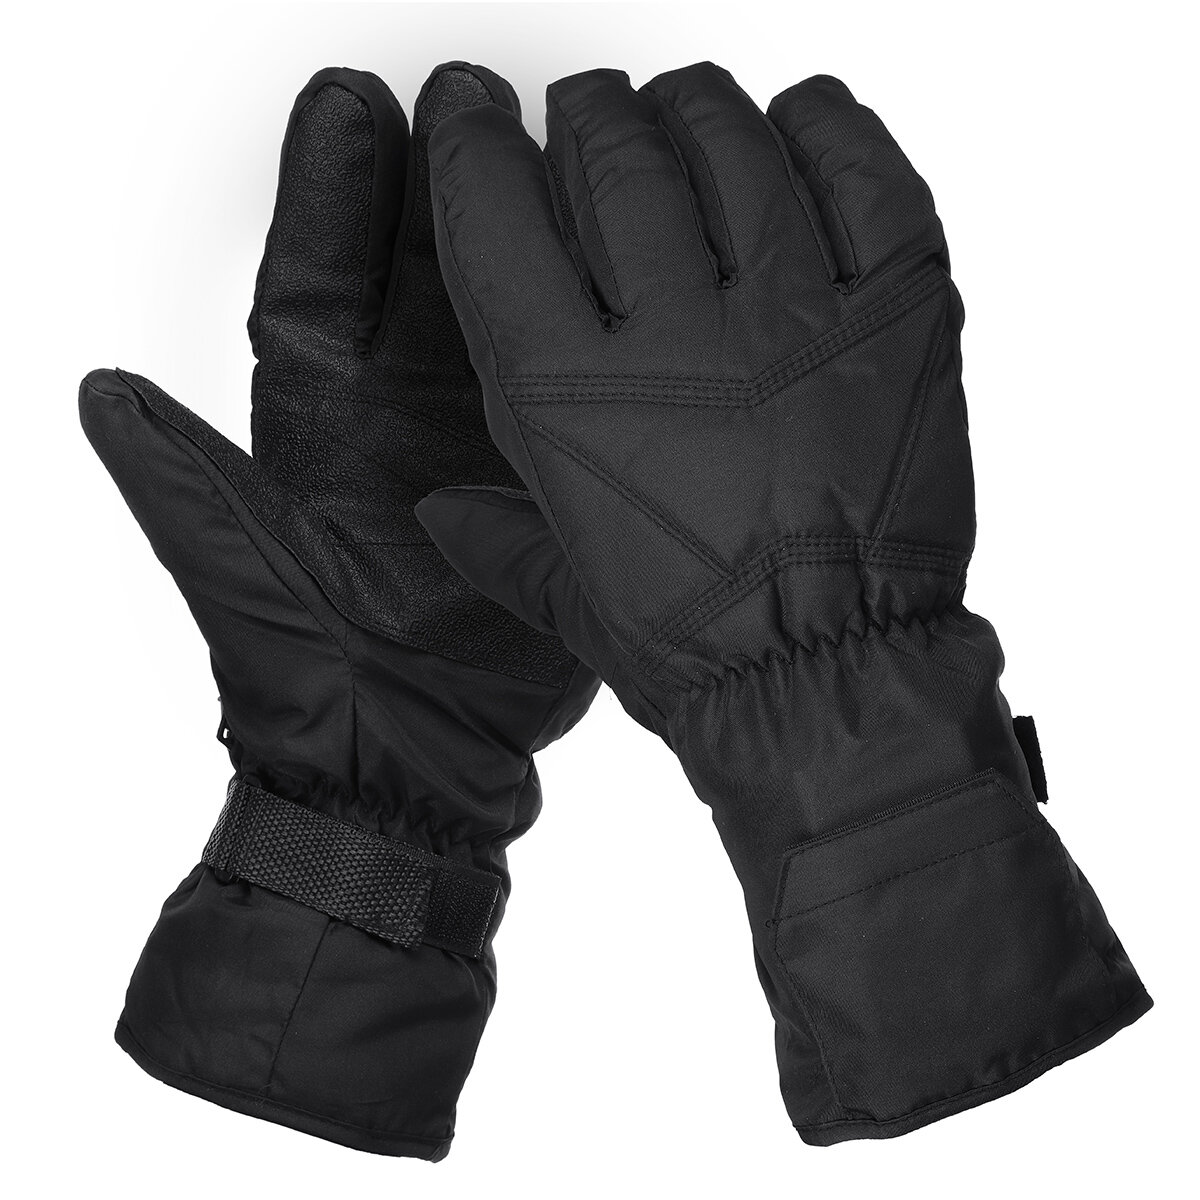  40℃ Cold Resistance Heated Battery Powered Gloves Waterproof Thermal Ski Gloves